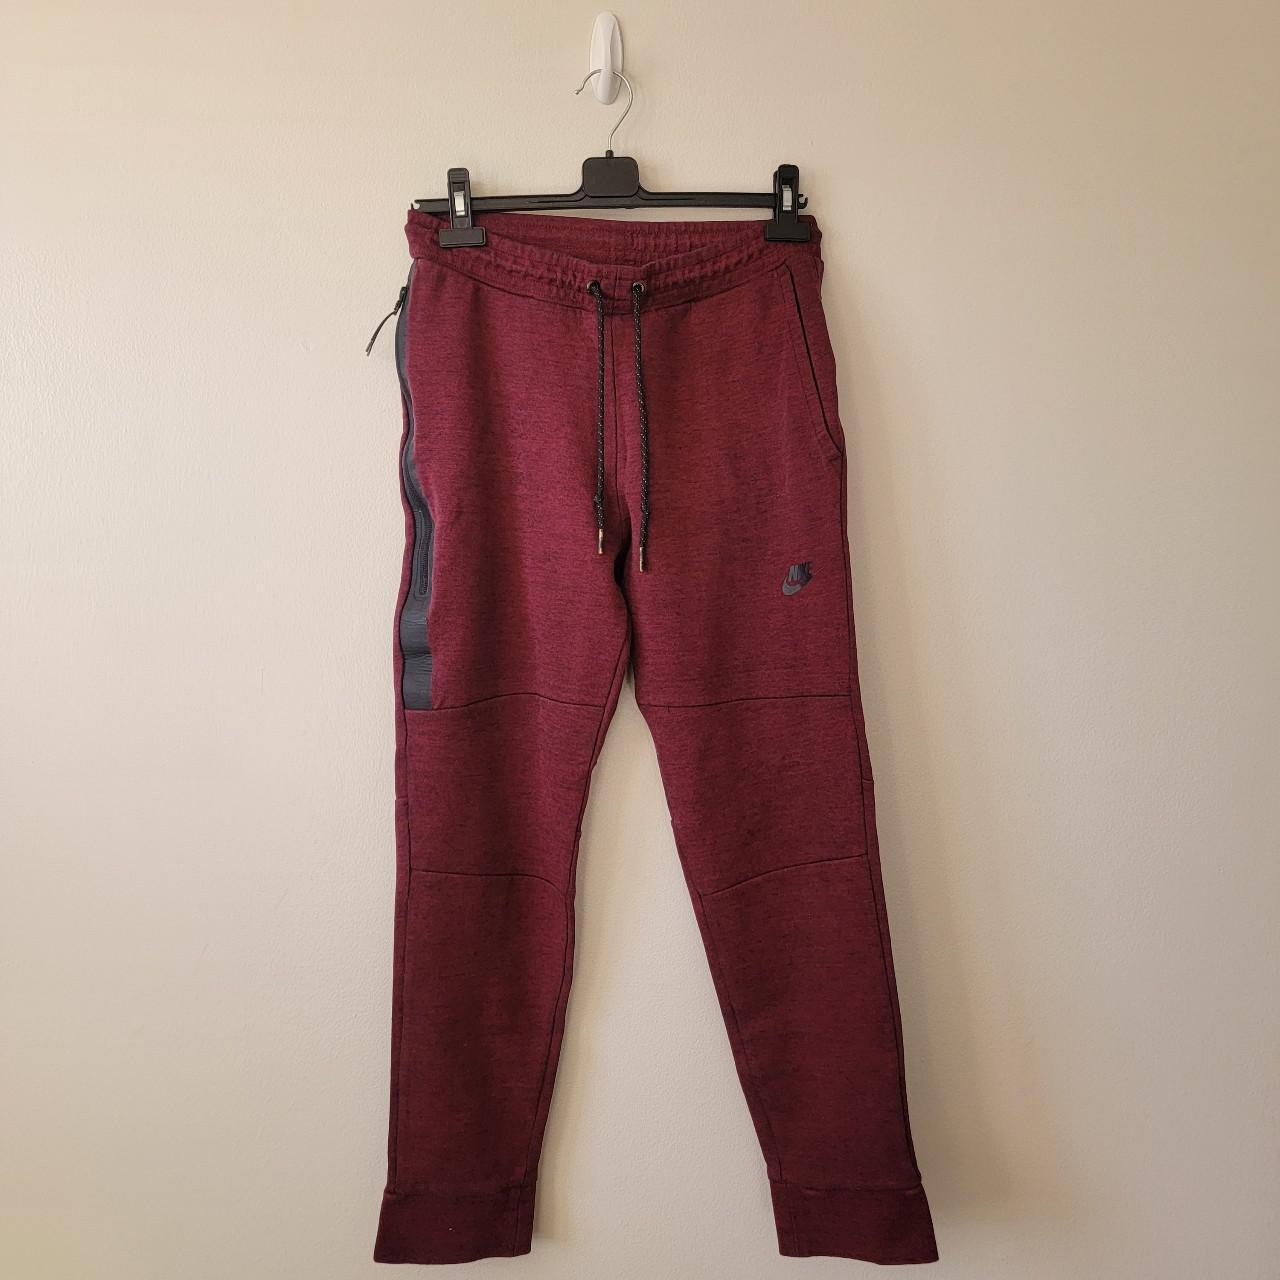 Nike Men's Red and Burgundy Joggers-tracksuits | Depop